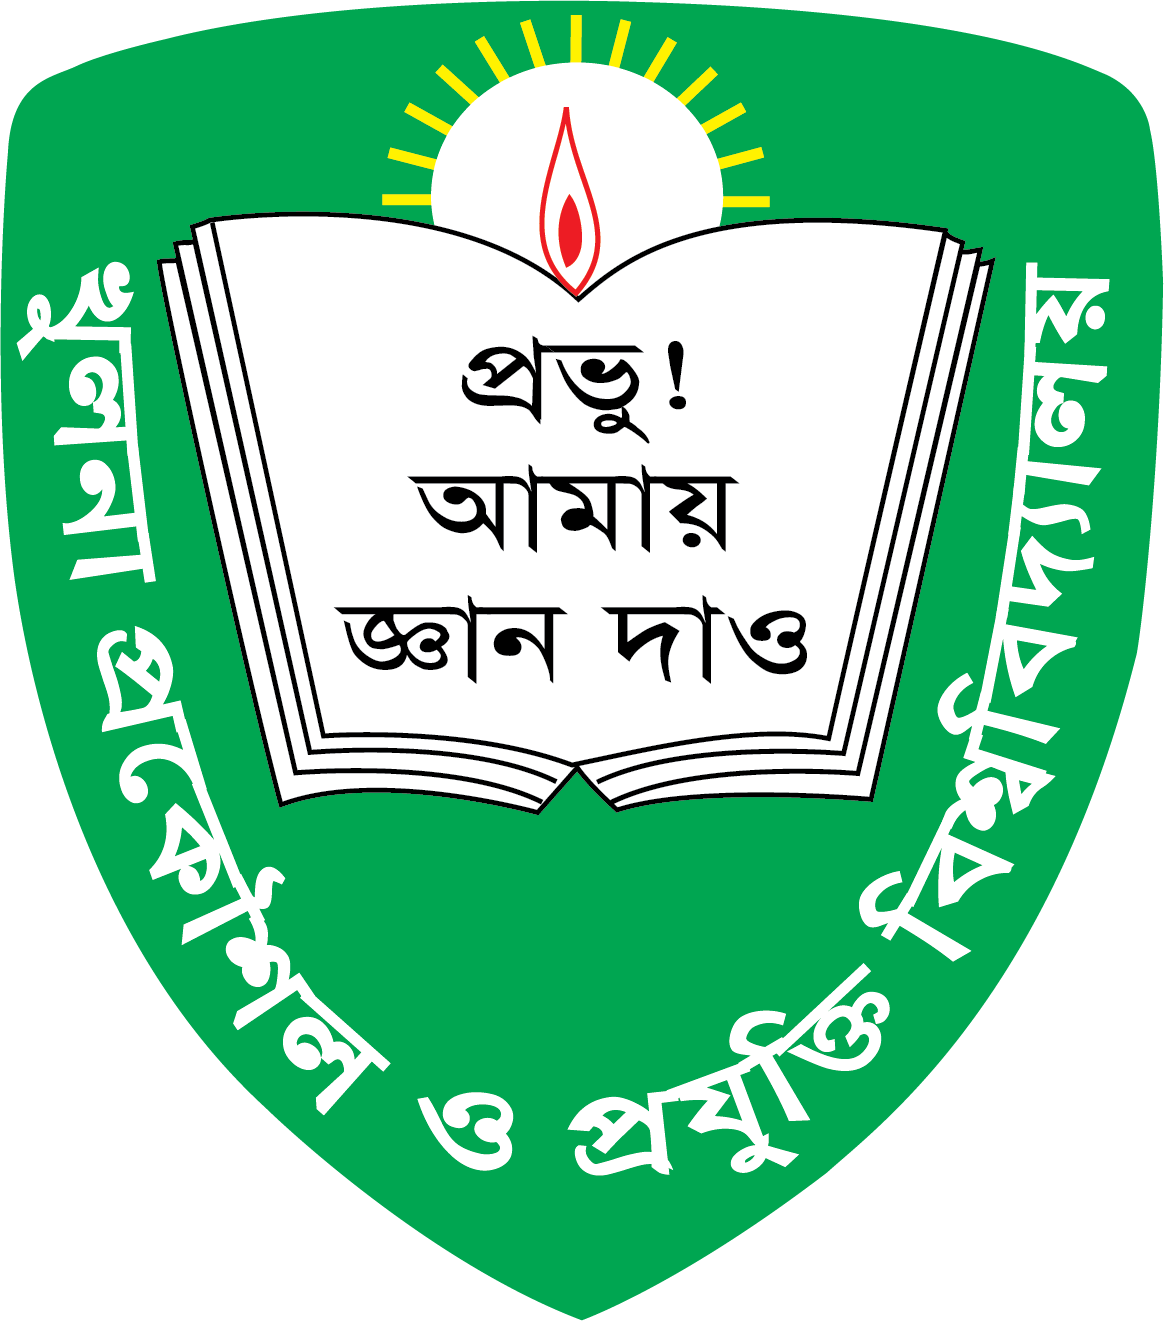 Department Of Electrical And Electronic Engineering - Khulna University Of Engineering And Technology (1164x1321)